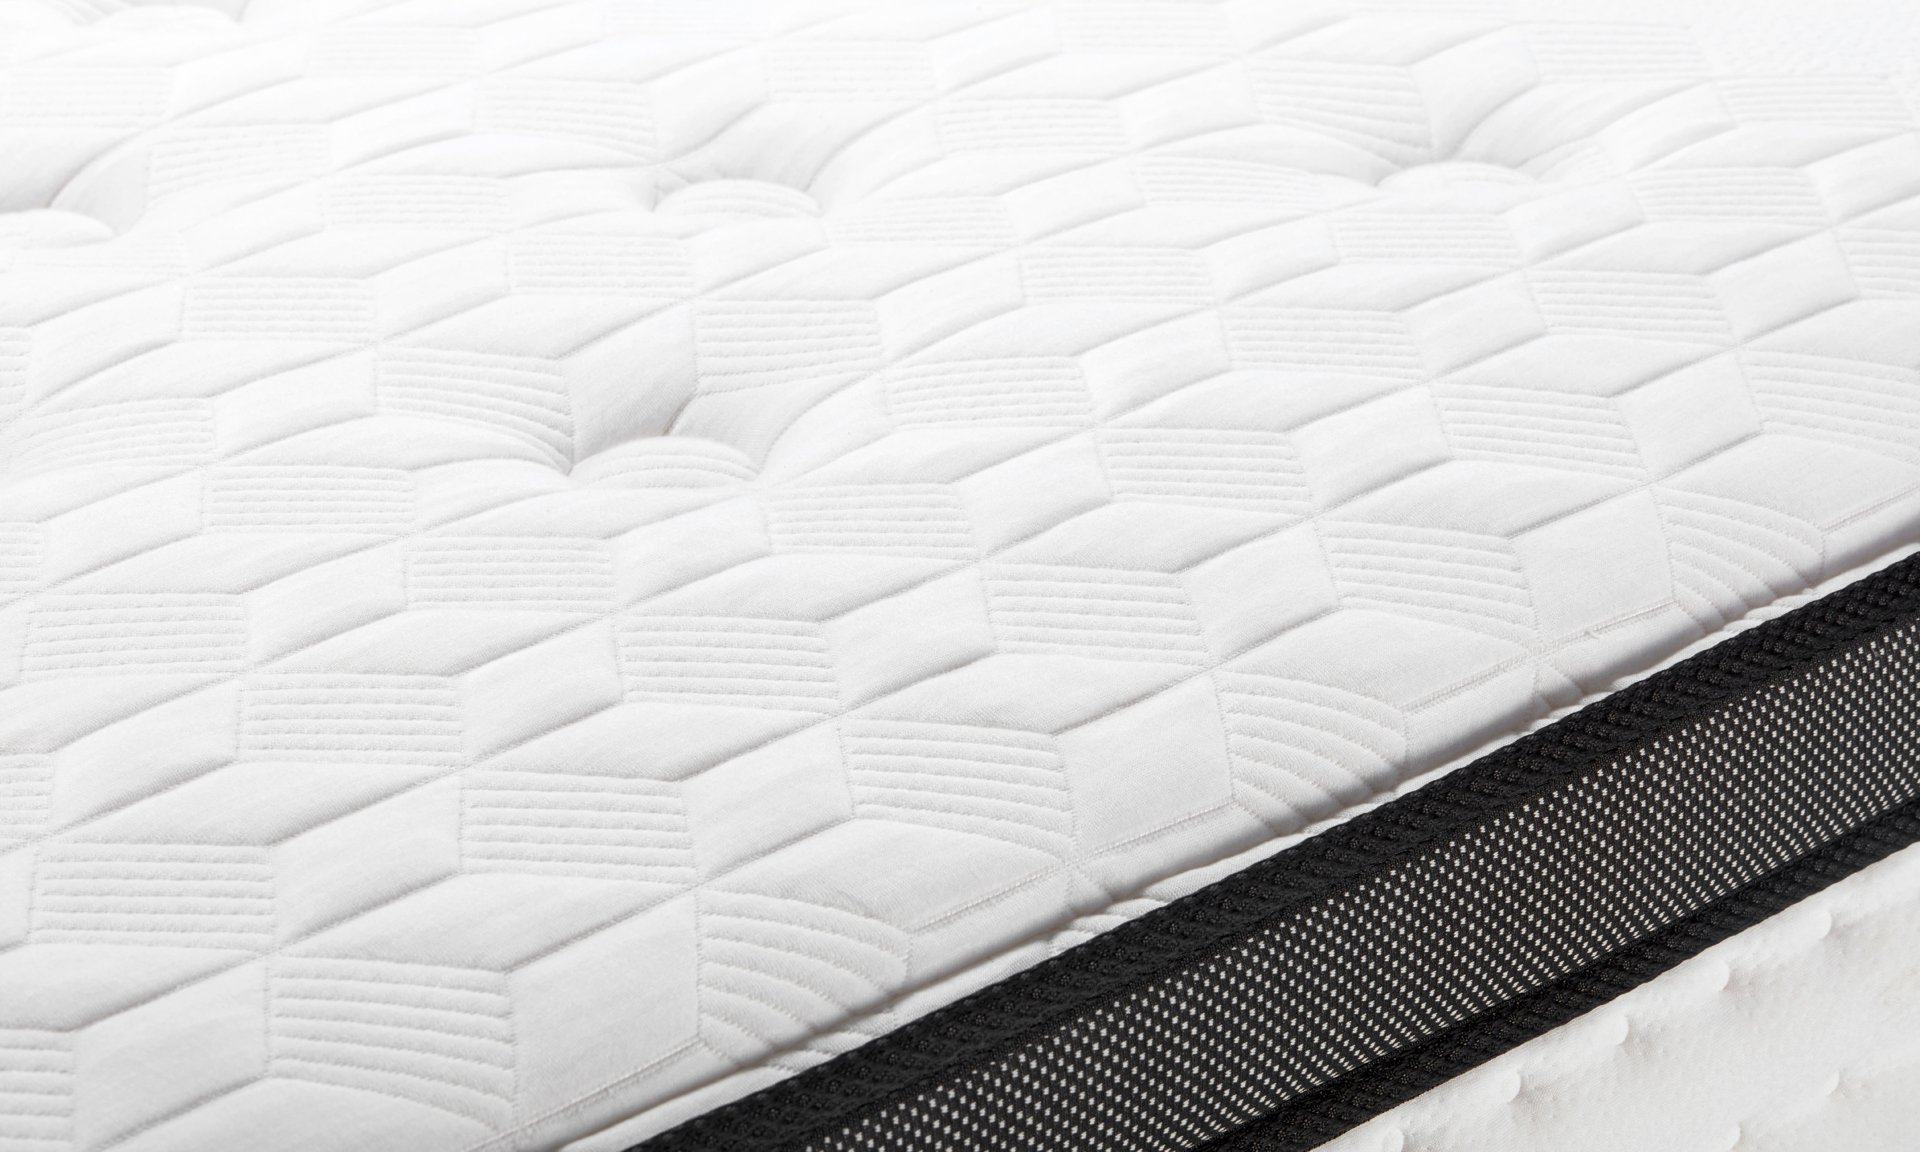 Queen mattress is available in different materials such as memory foam, latex, hybrid and more.